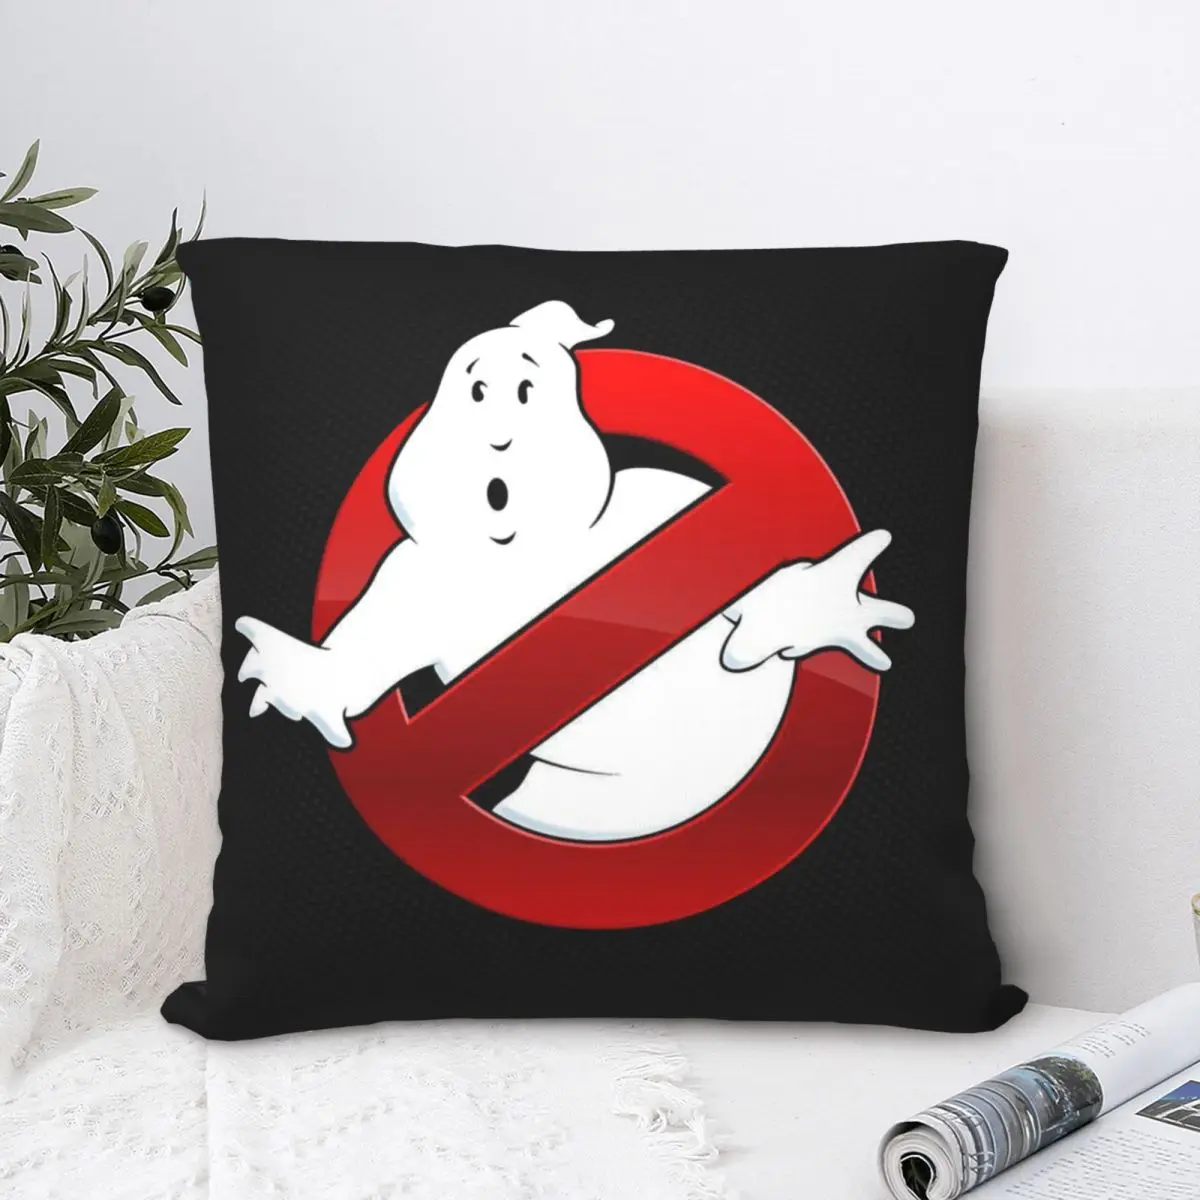 Cute Throw Pillow Case Ghostbusters Pete Suspense Movie Backpack Coussin Covers DIY Printed Washable For Sofa Decor